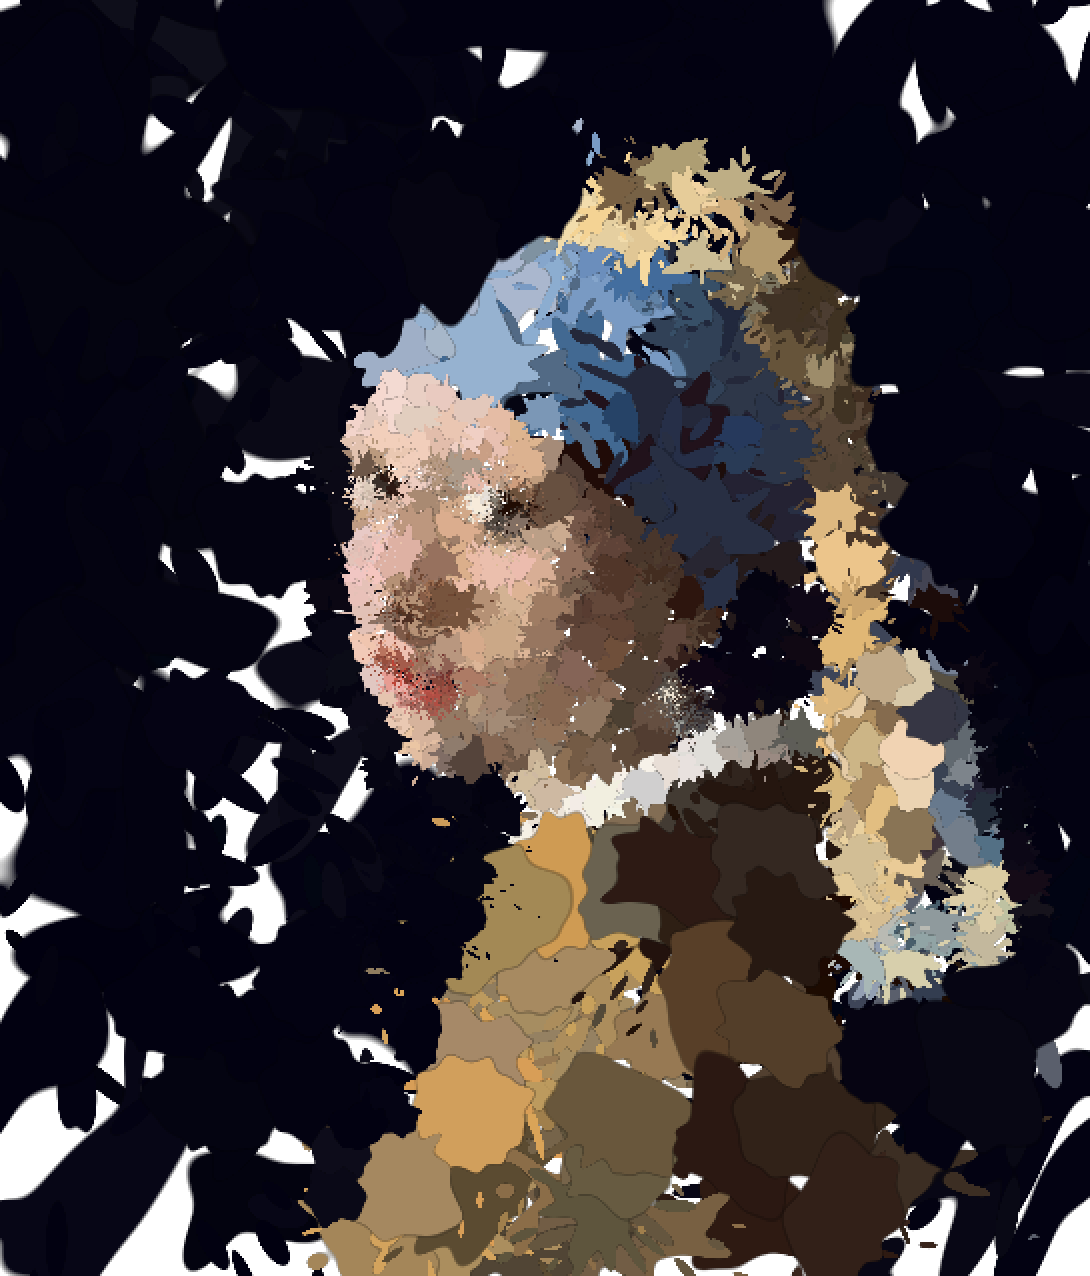 Girl with a pearl earring, using an iPad, Apple Pencil and painting